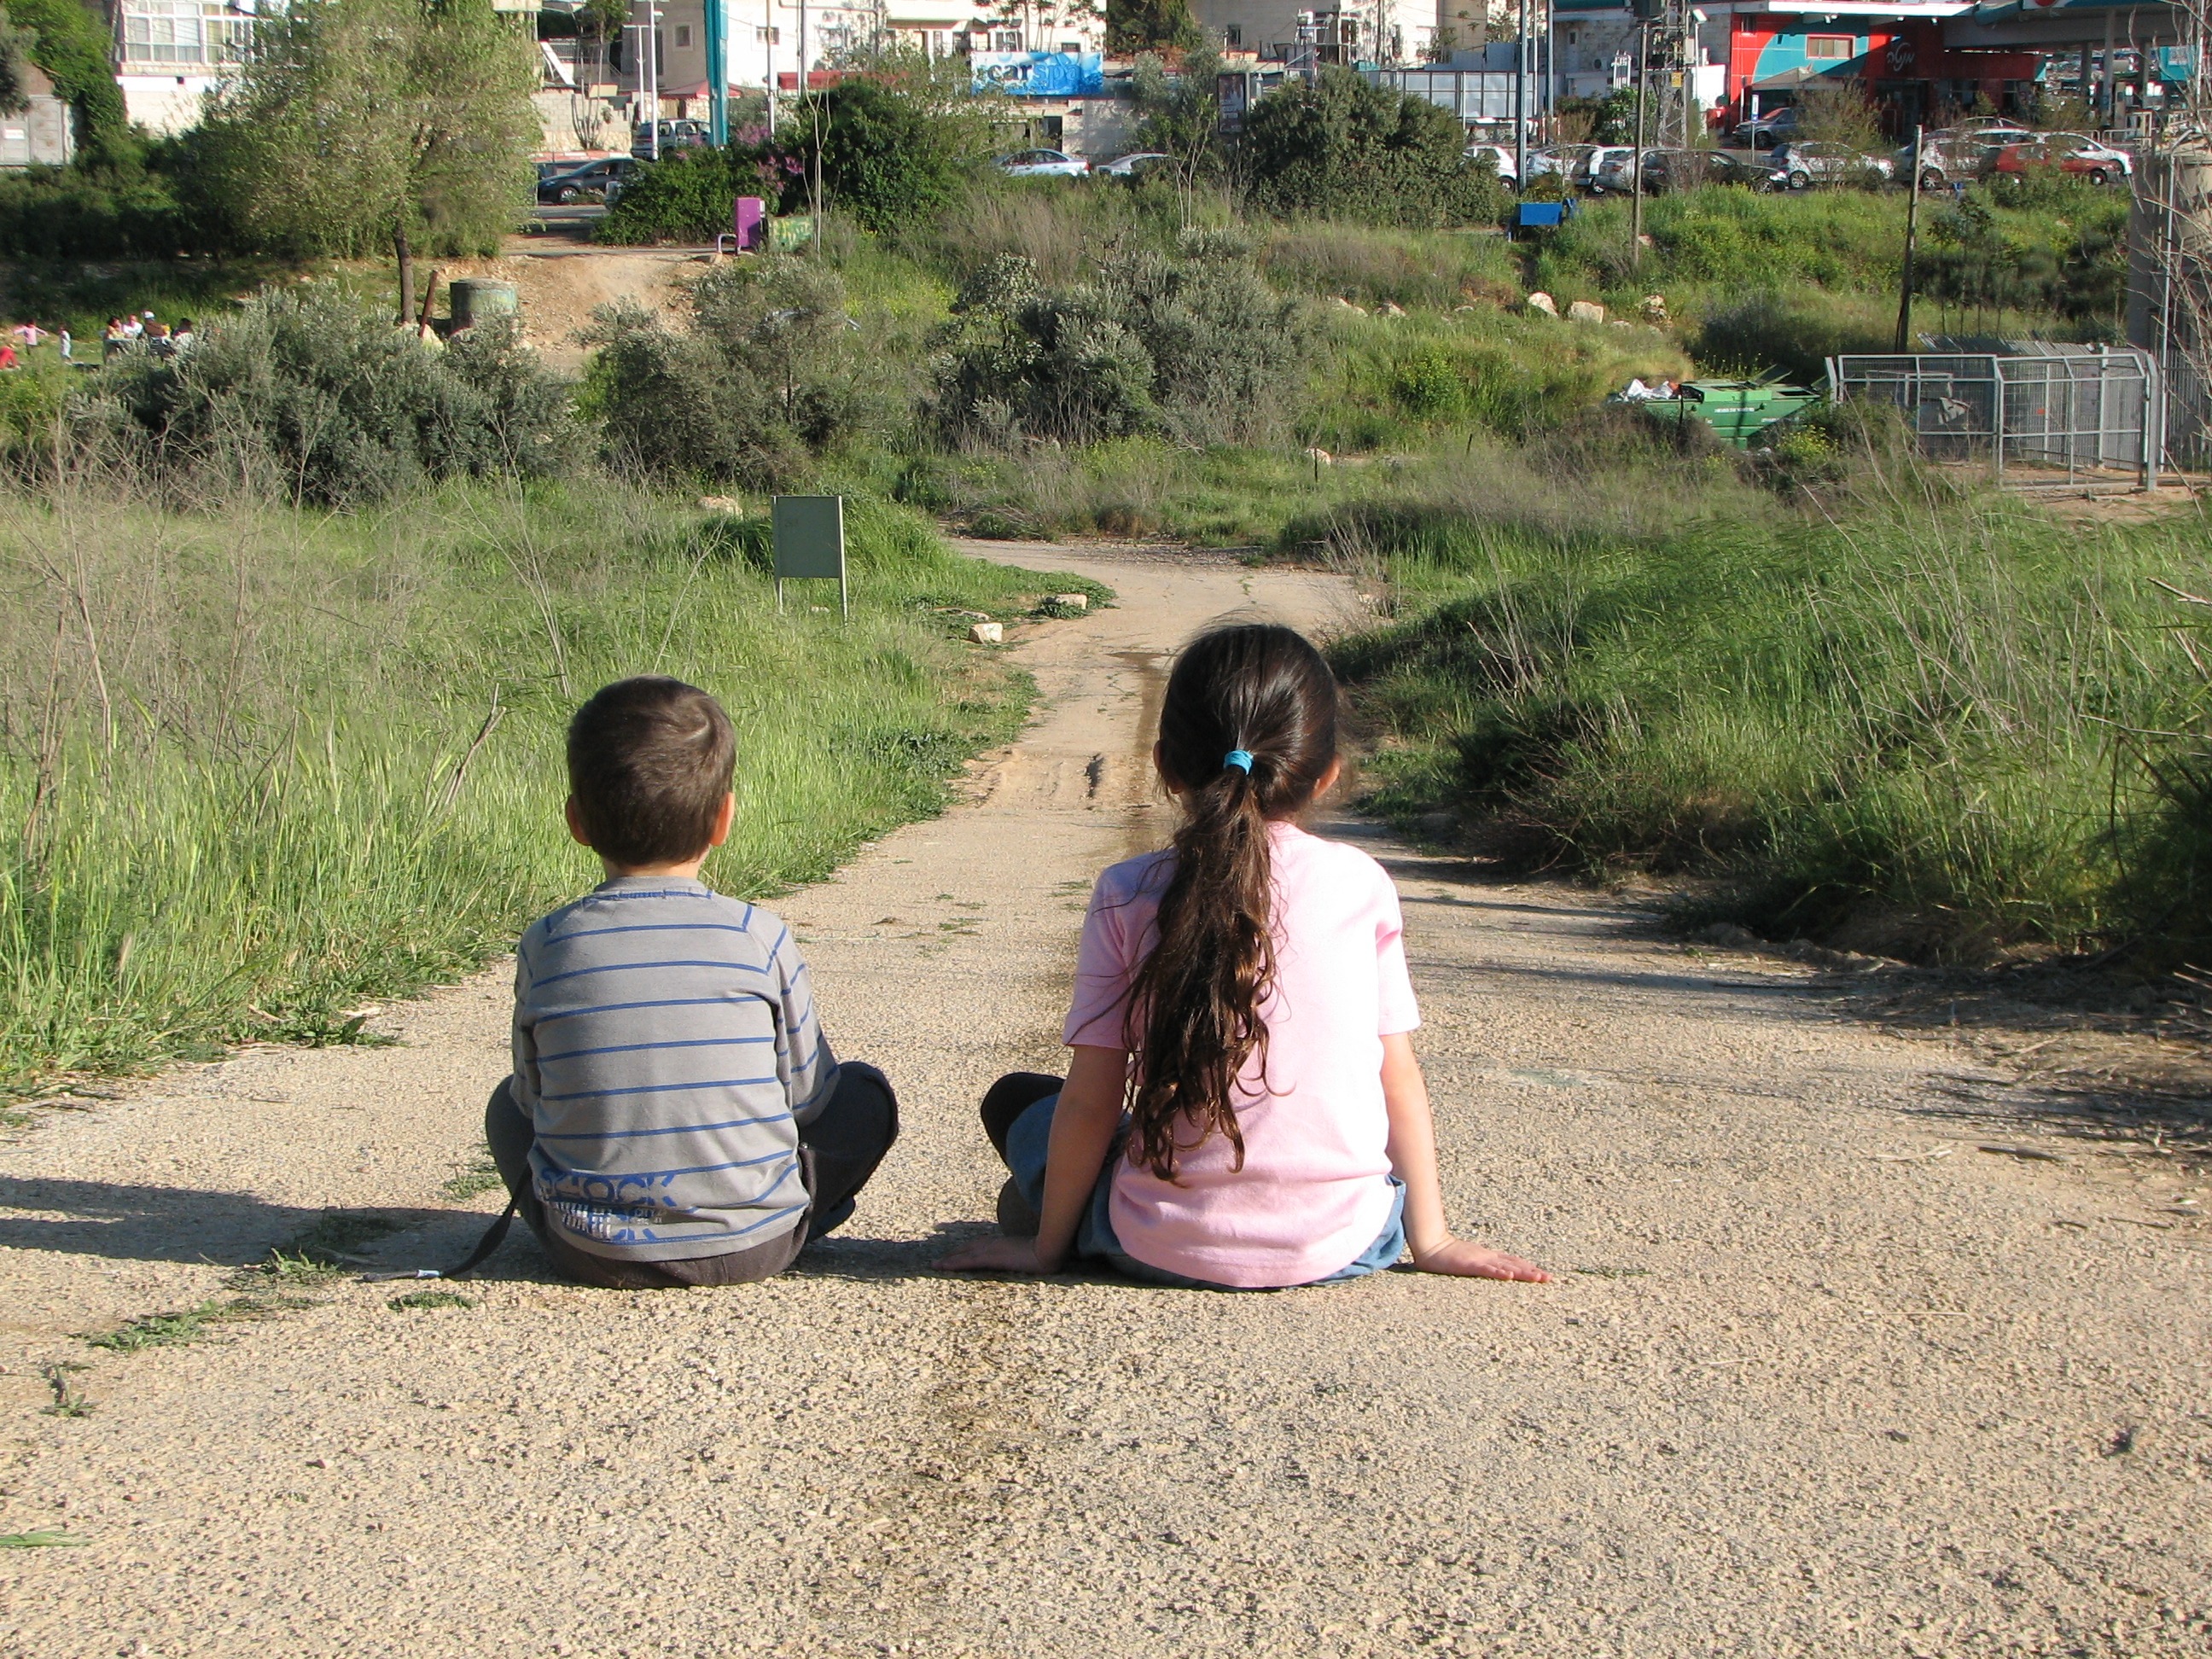 Two children shown from behind sitting on a pathway overlooking a town